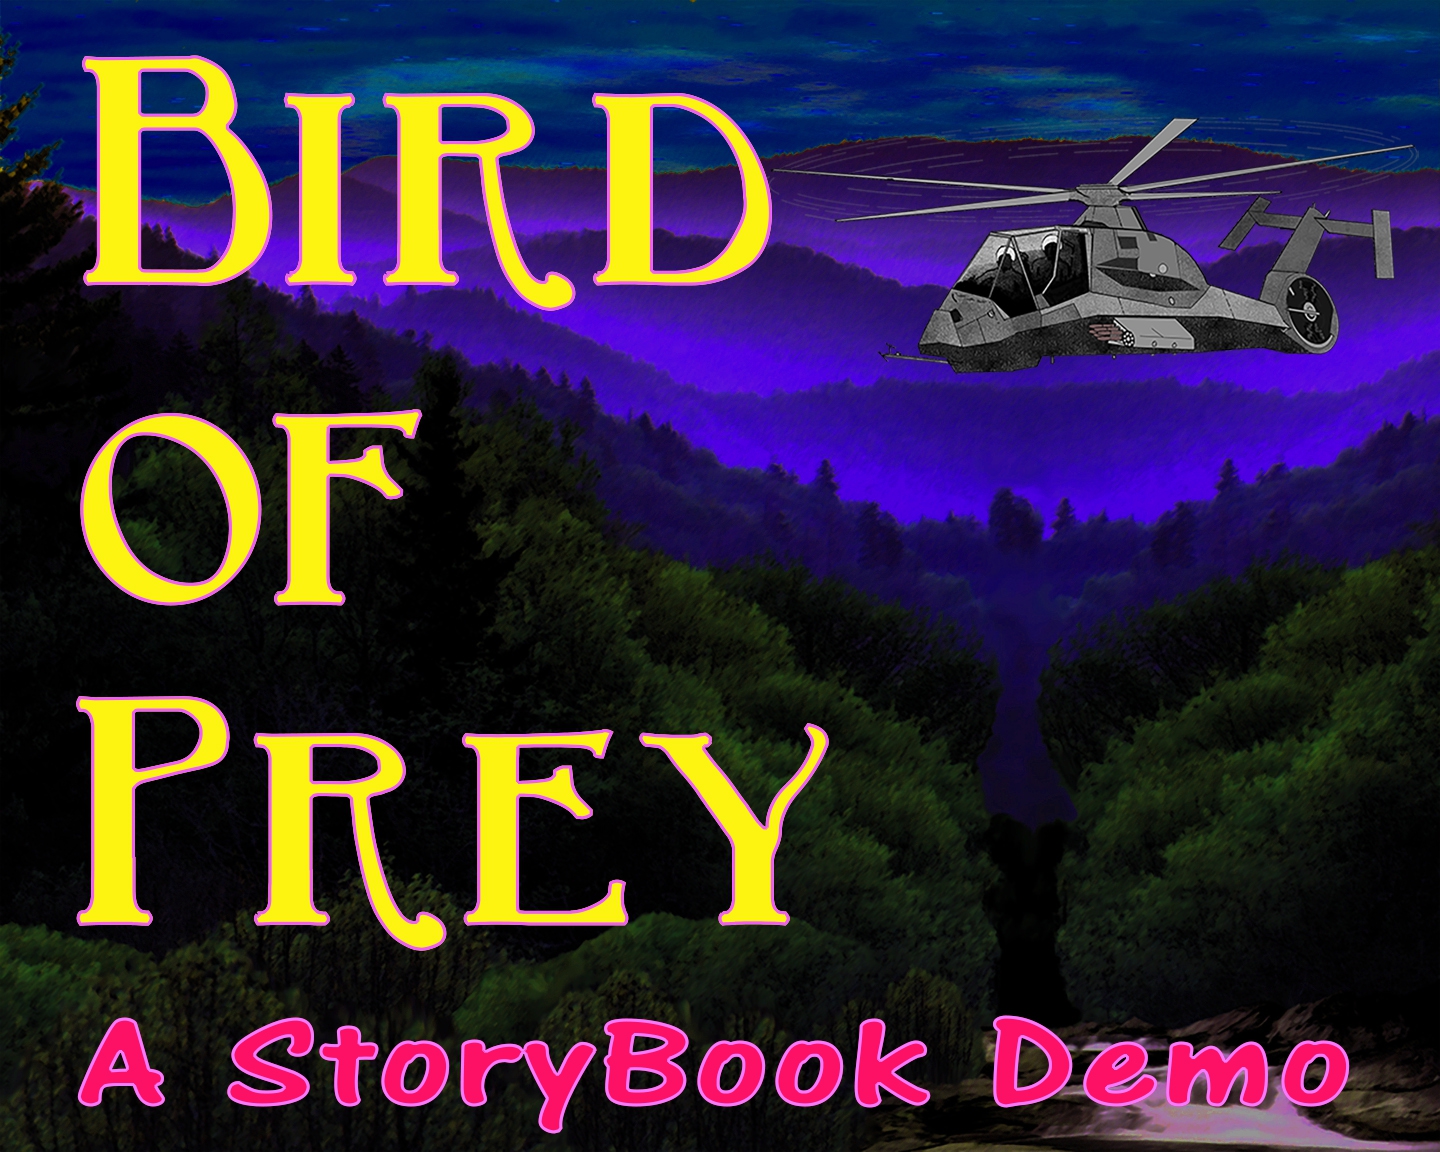 Night scene of the Hornet chopper over a woodland creek with hills receding into background overlaid with the title text.